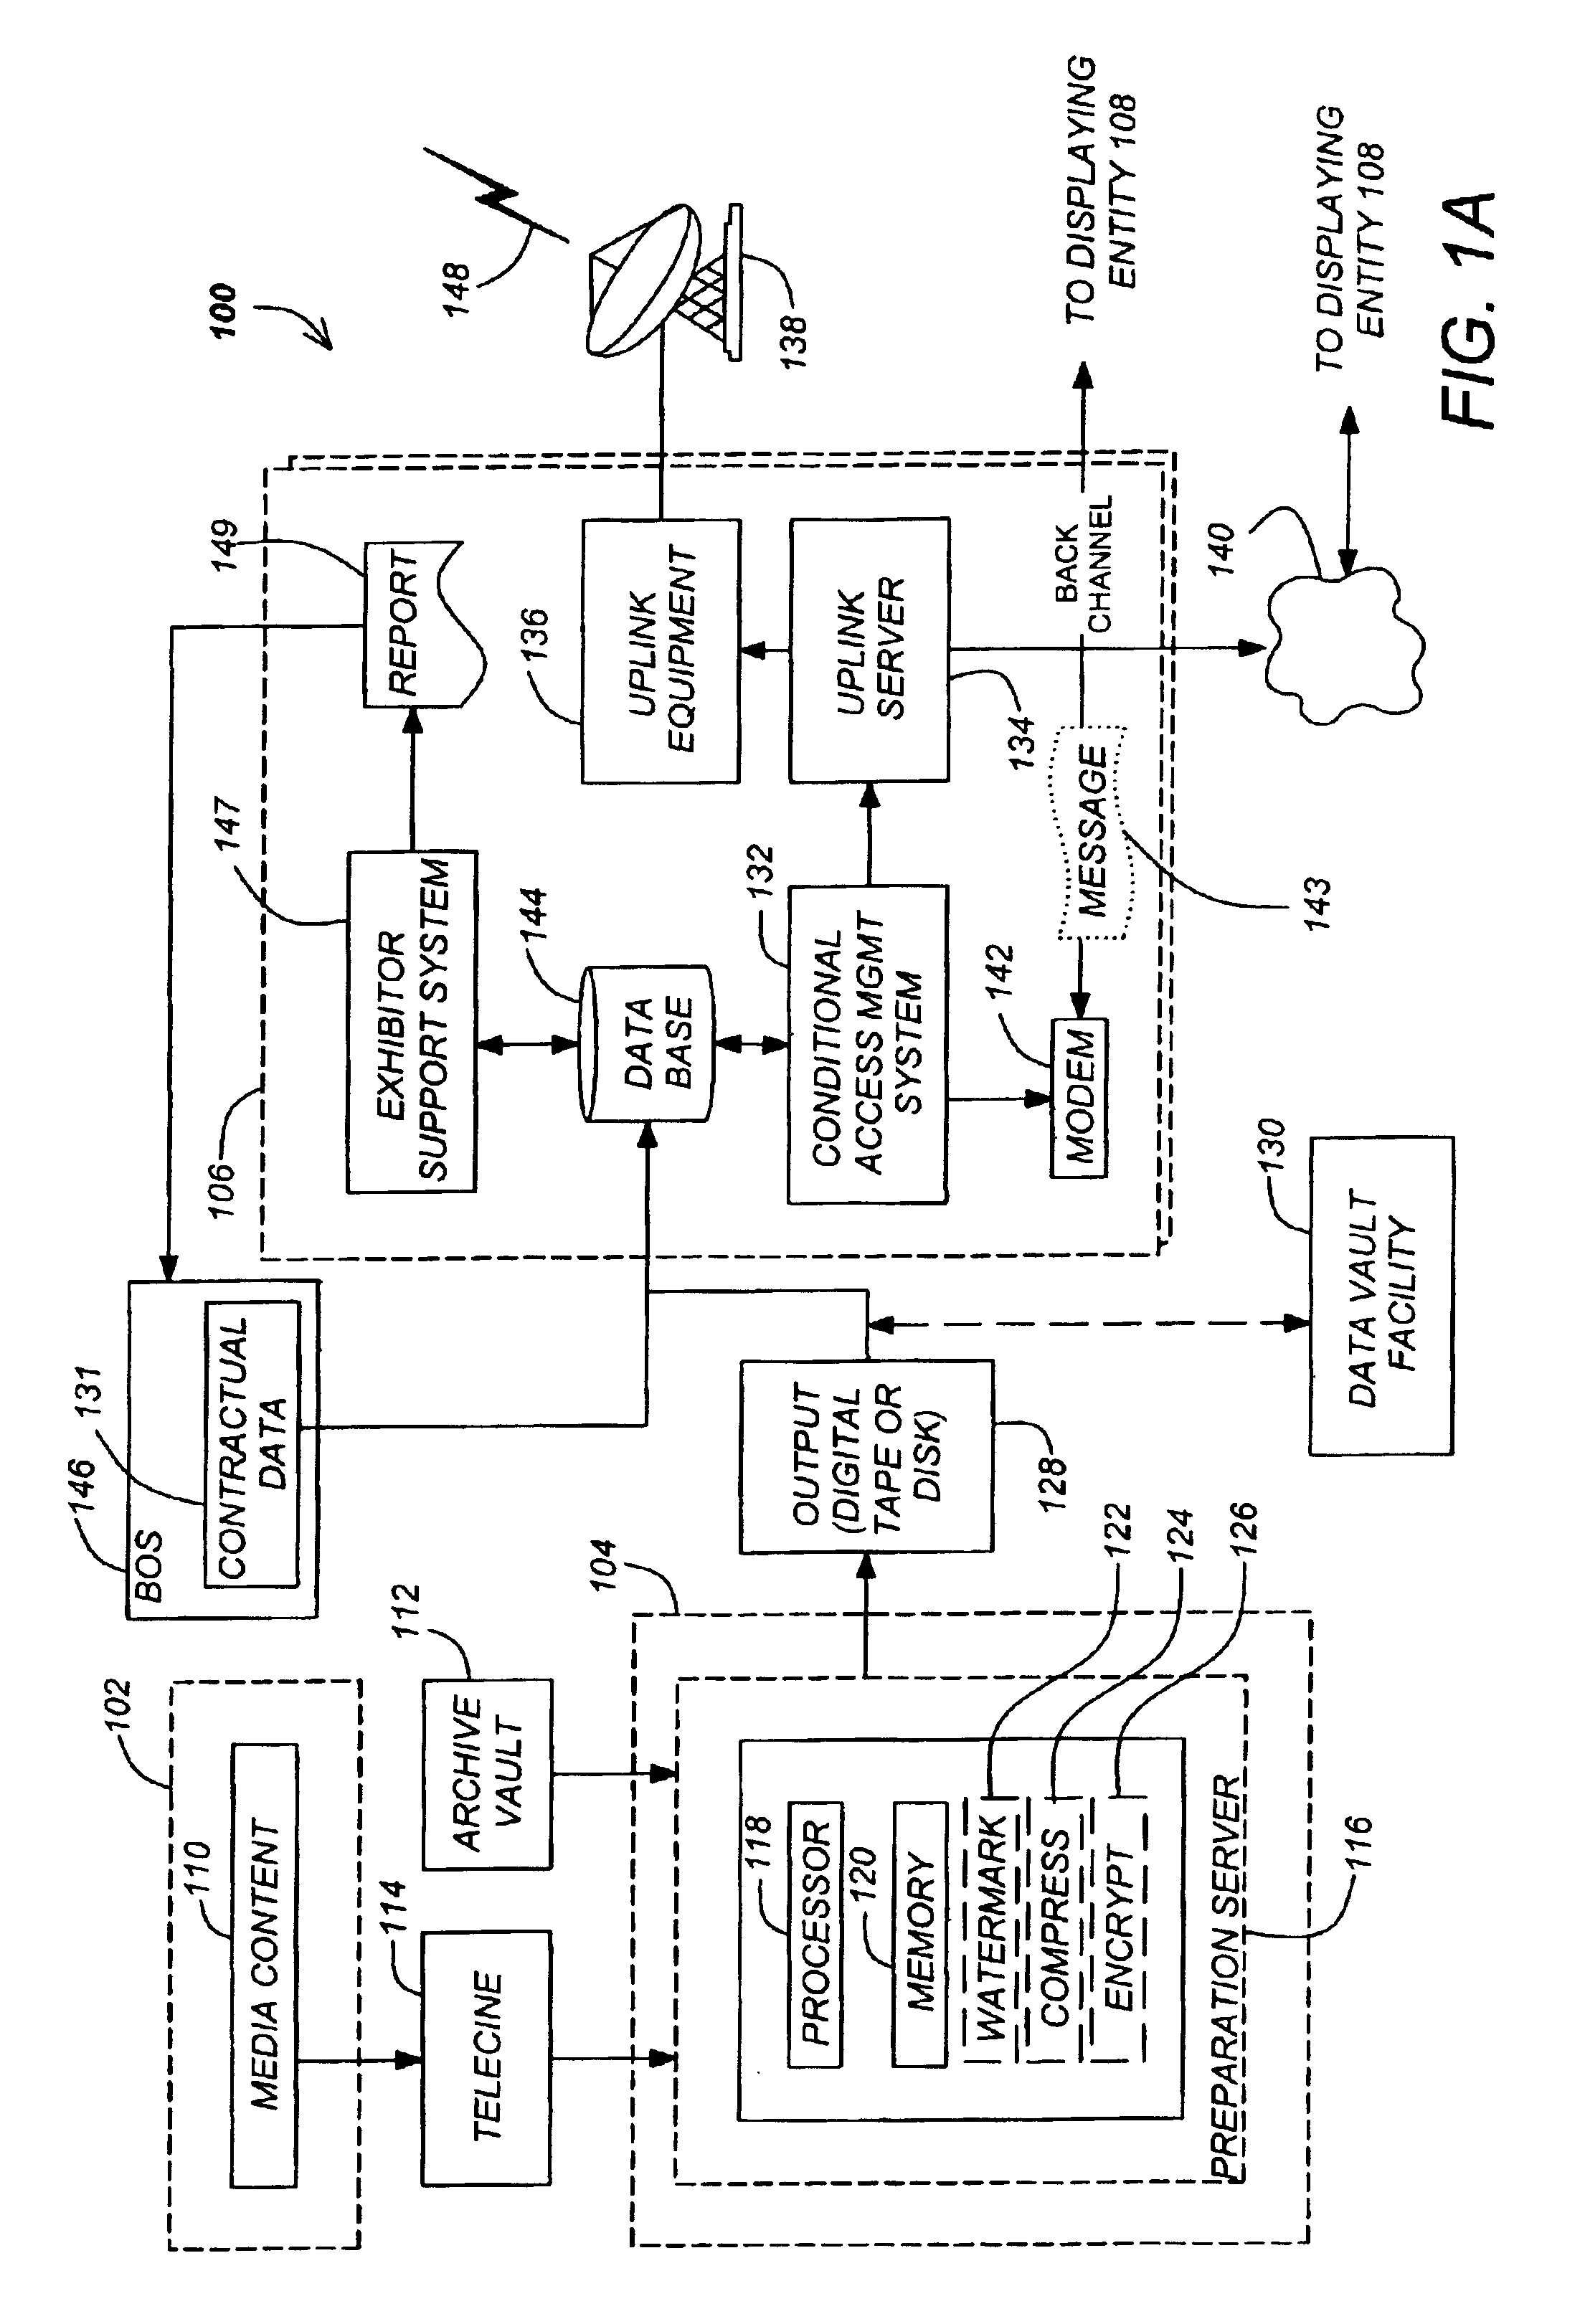 Method and apparatus for comparing actual use data with contract data